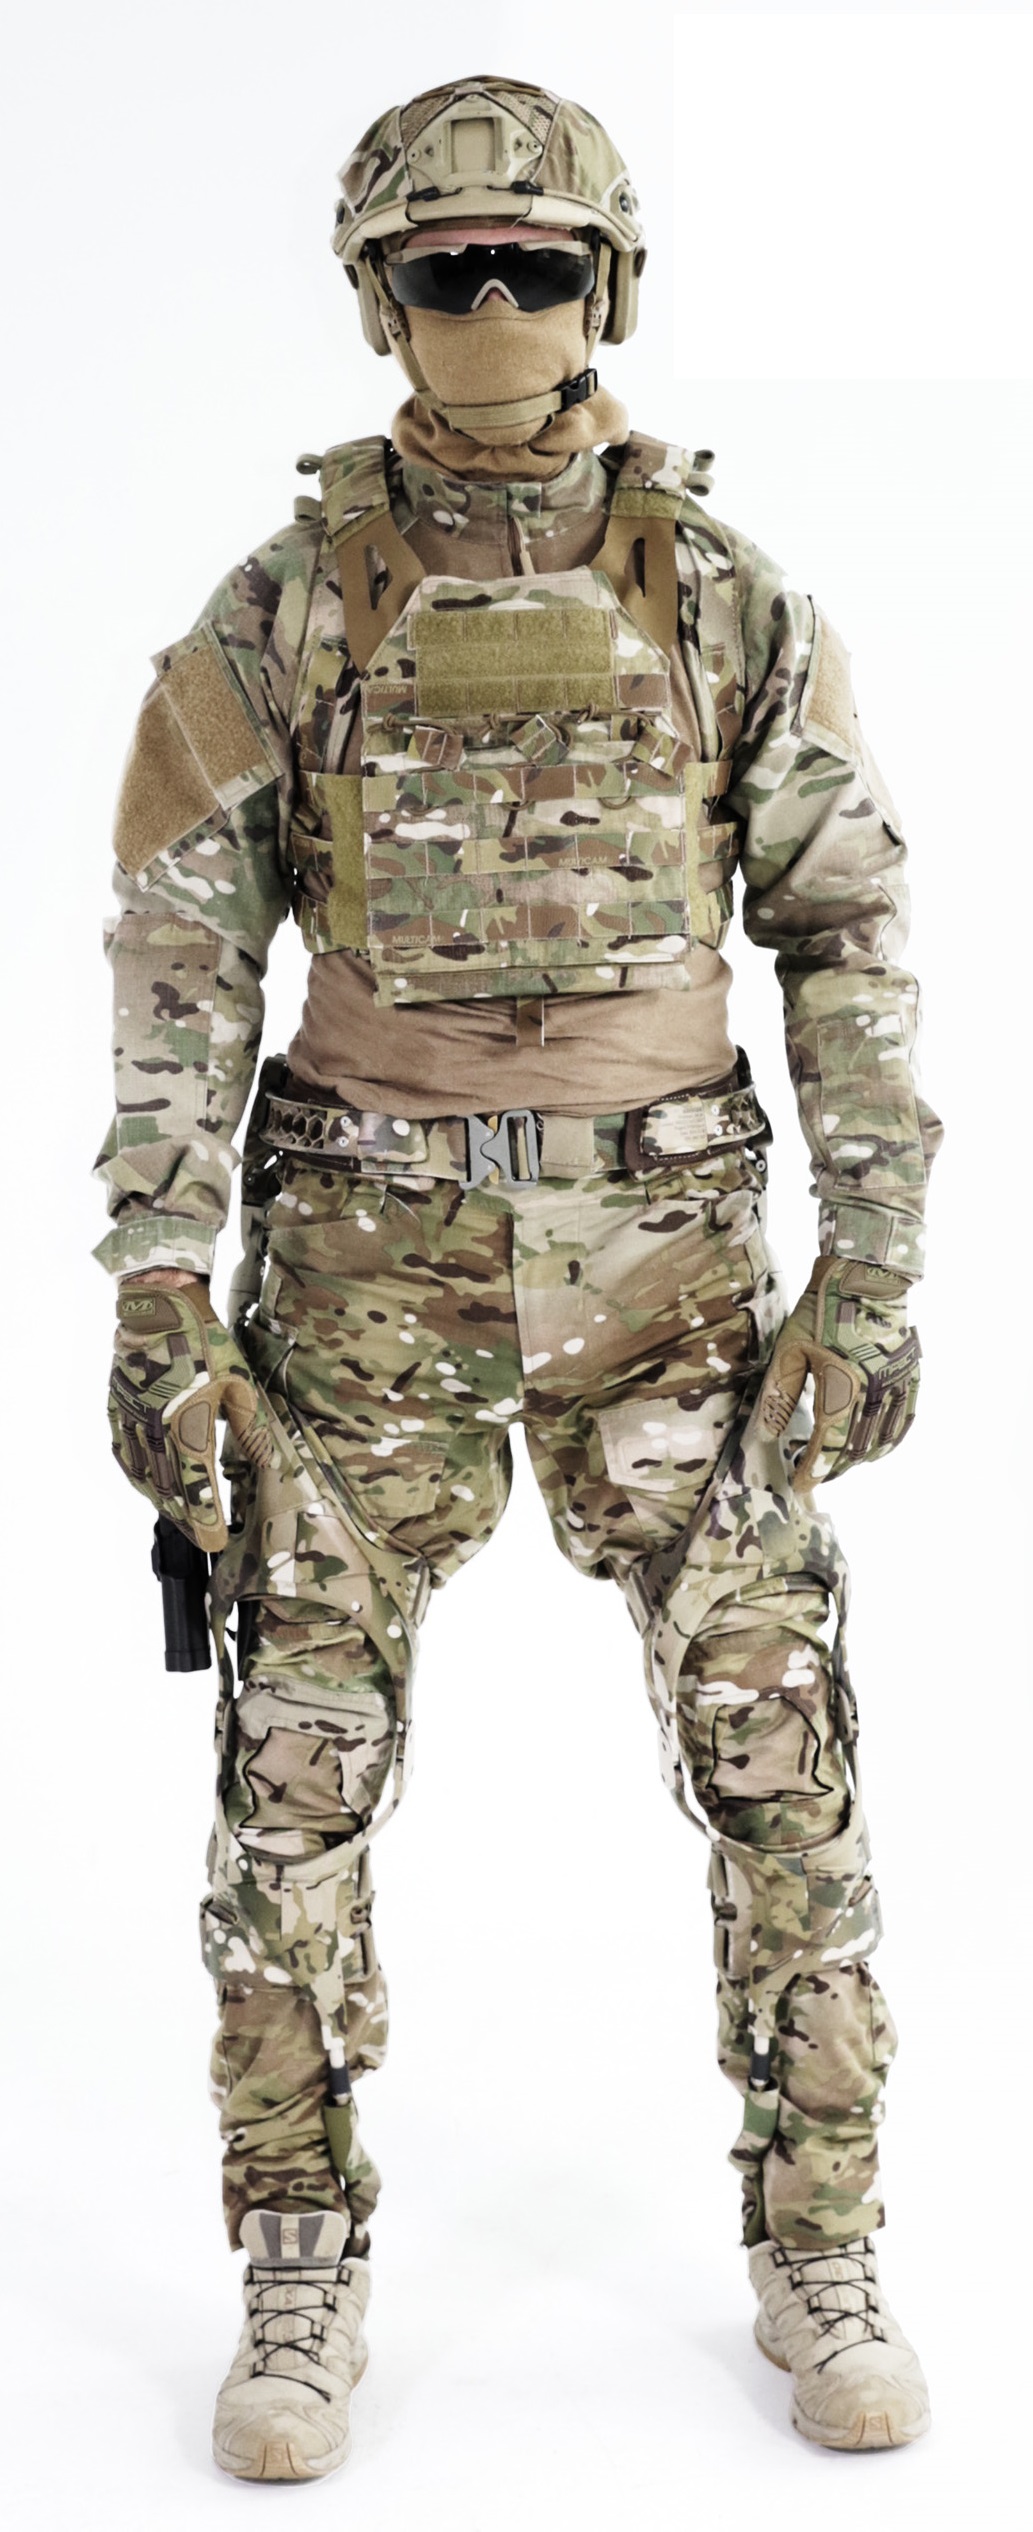 Logistik has developed a new exoskeleton product to assist the dismounted soldier